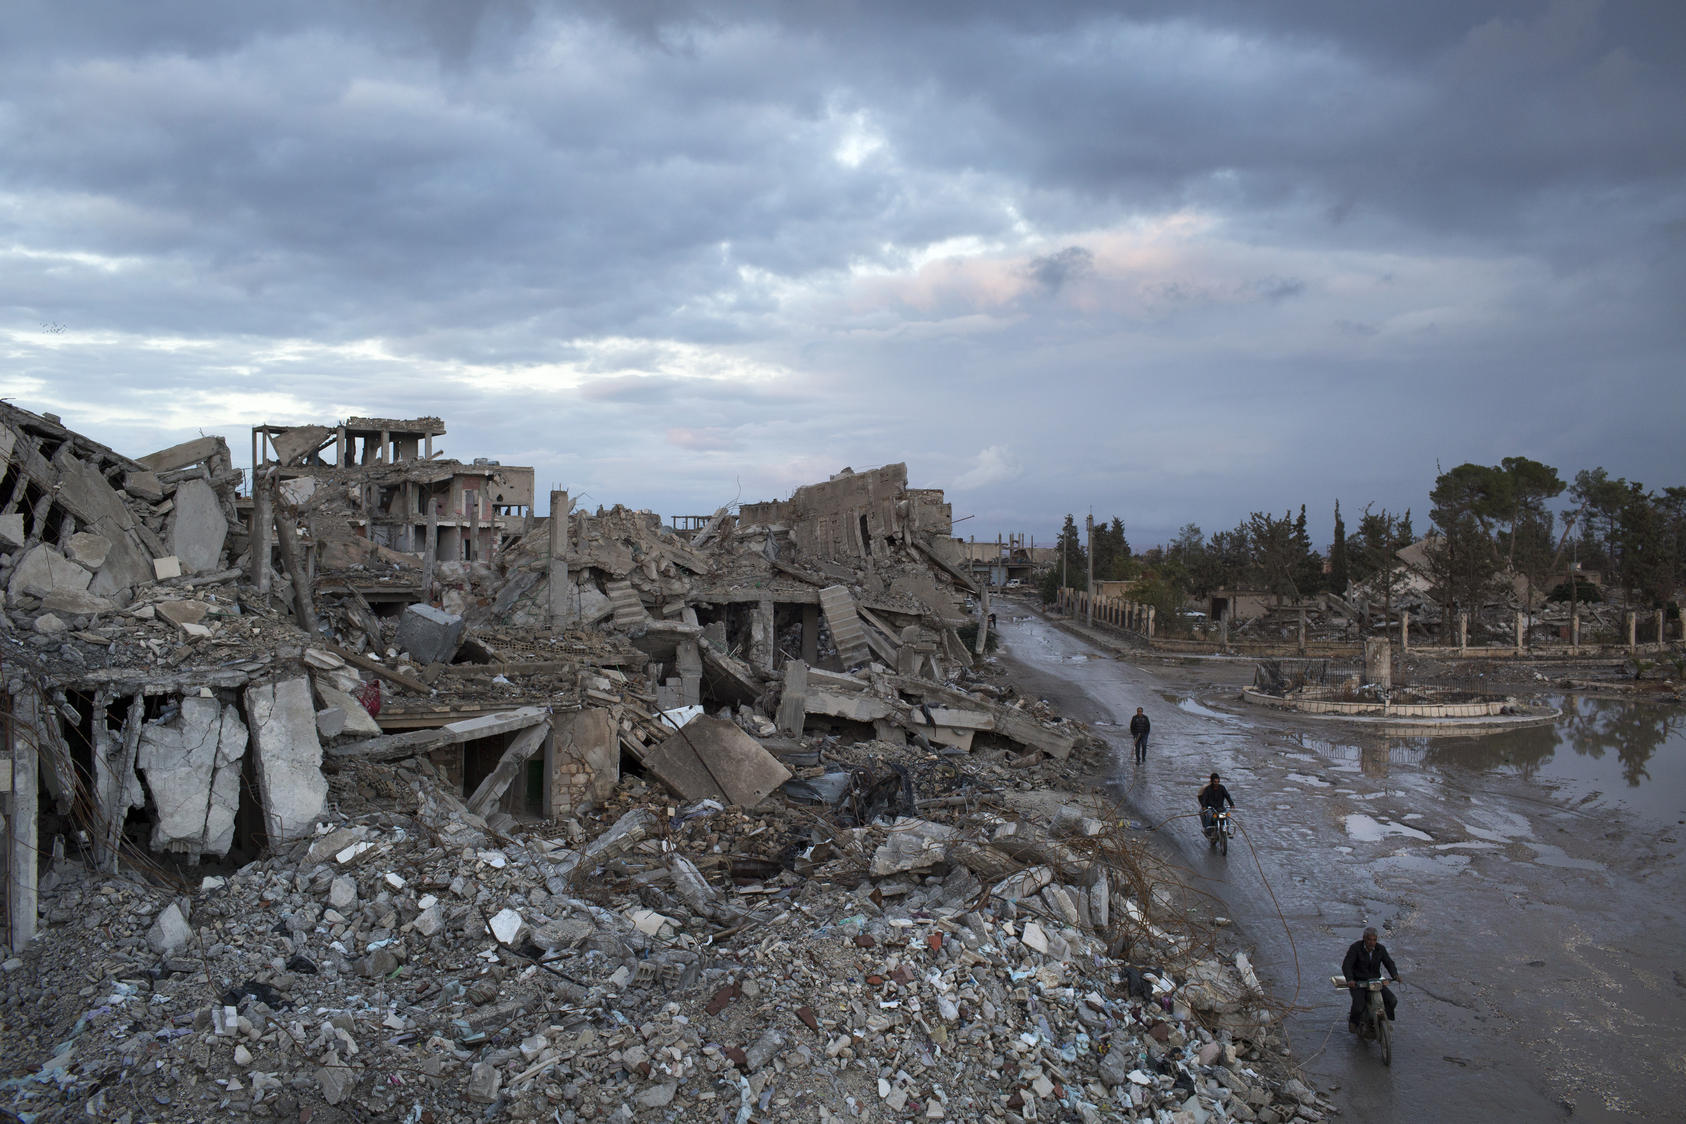 Widespread destruction in Kobani, Syria, months after coalition airstrikes and Kurdish fighters repelled an invasion by the Islamic State group, Oct. 27, 2015. The recent Turkish intervention in northern Syria conjured for many Kurds memories of broken vows by Western powers dating back to World War I, when they were promised, then denied, their own state. 